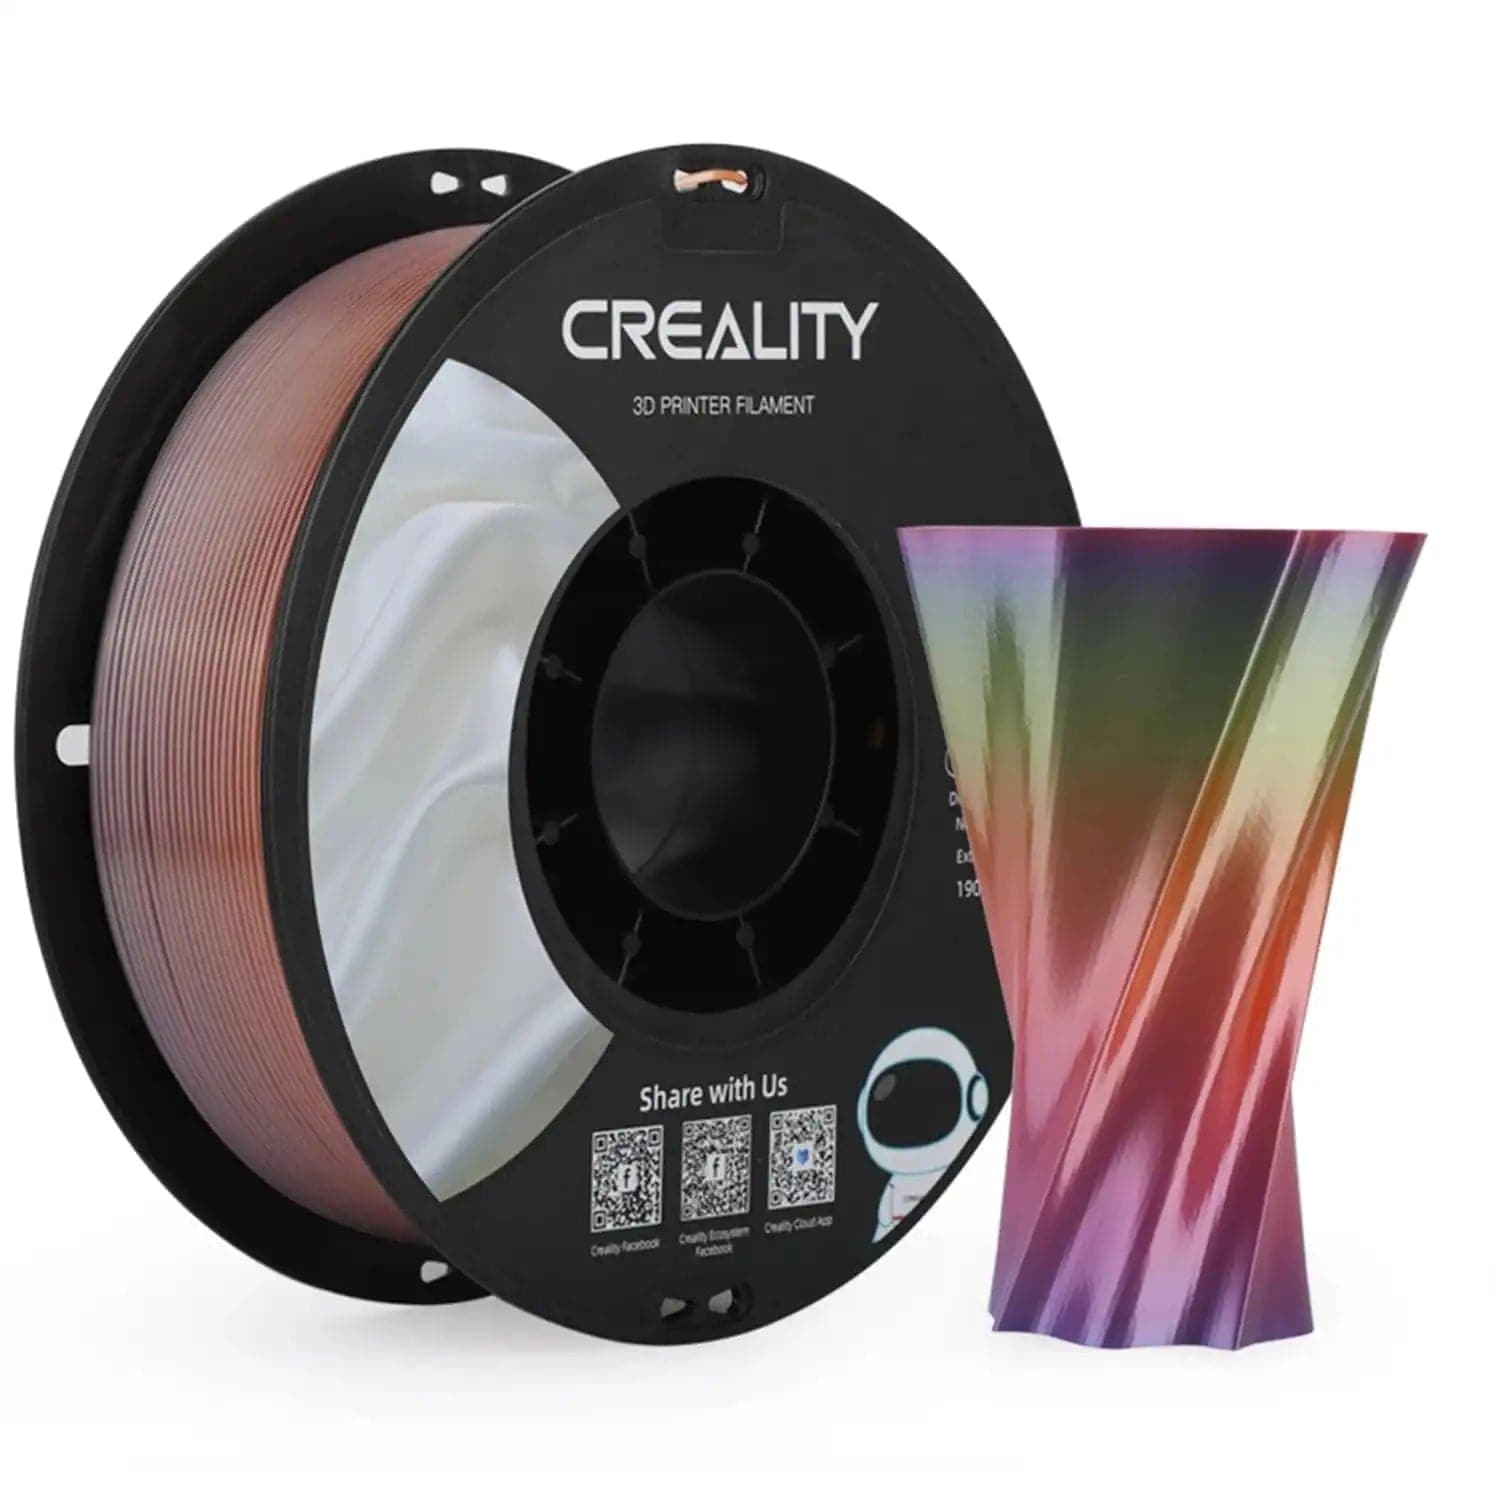 CREALITY Silk PLA Filament 1.75mm 1kg Dual Color, Rainbow Color
【Ship From Amazon FBA Warehouse】Same shipping service with Amazon. Enjoy reliable performance and fast shipping with the Amazon FBA Warehouse.
【Shiny SILK PLA Filam75mm 1kg Dual Color, Rainbow Color3D Printing Materials